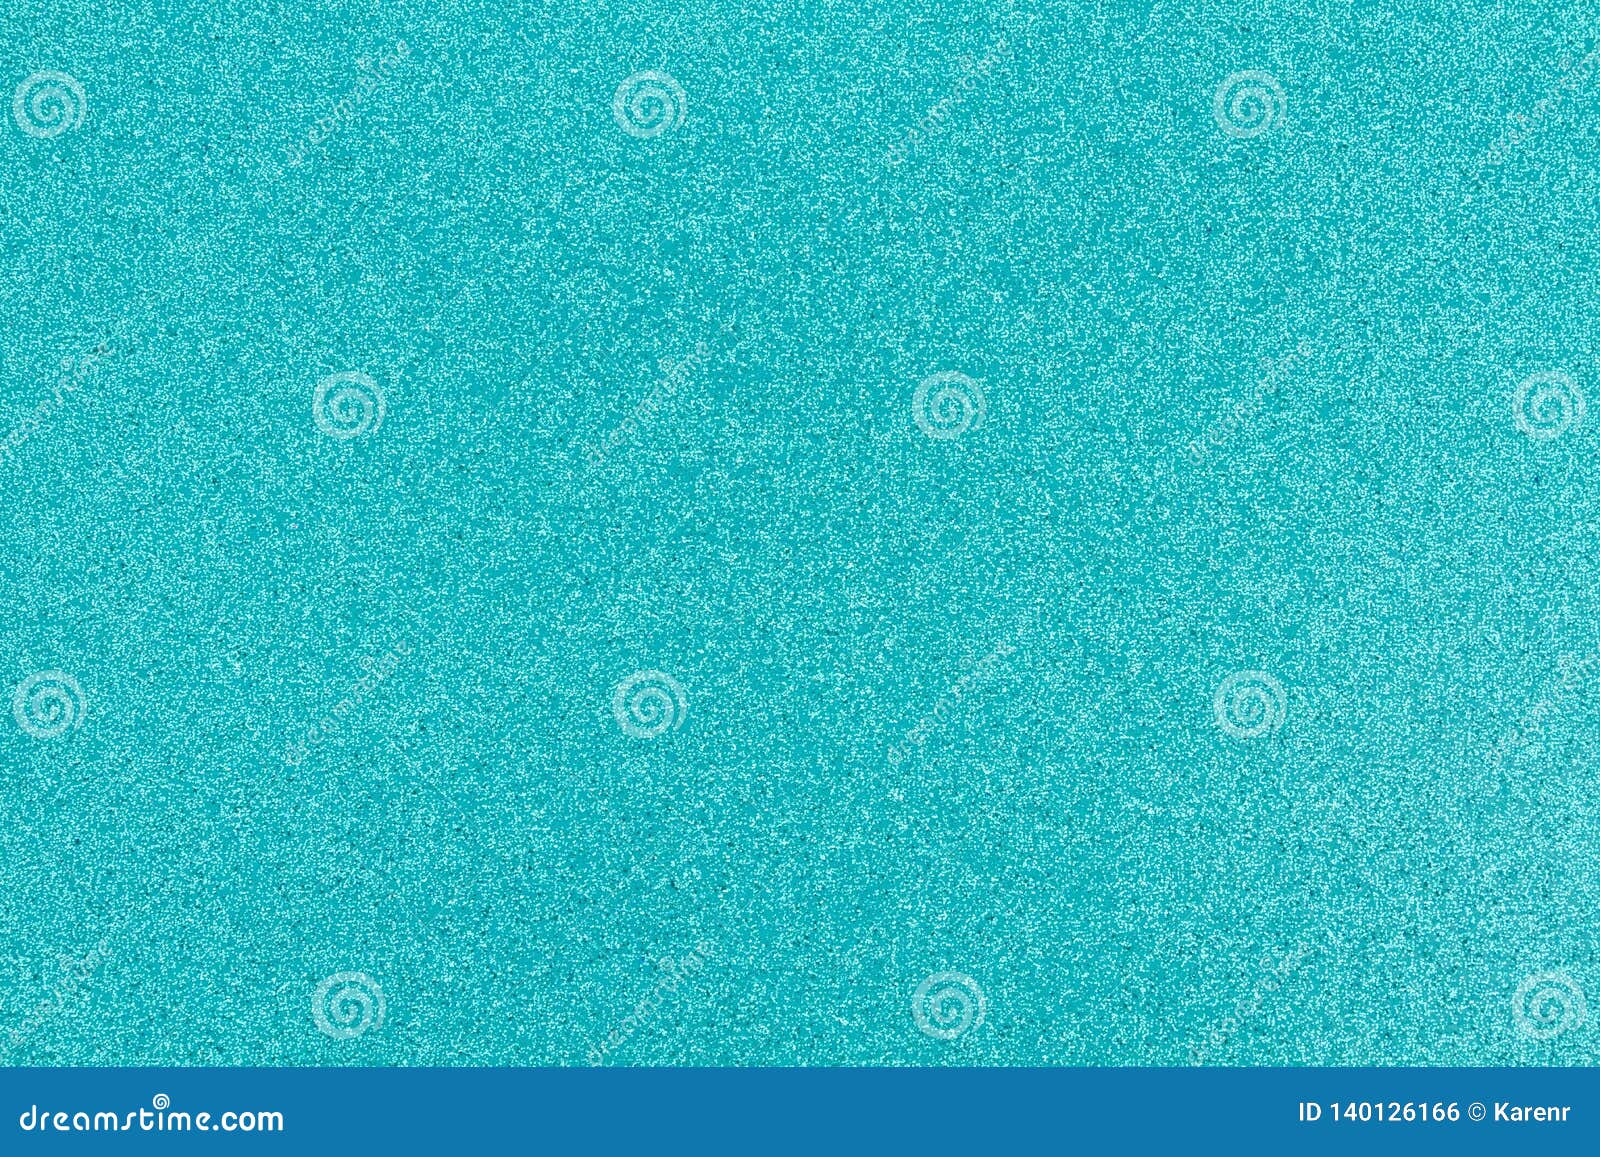 19300 Turquoise Glitter Stock Photos Pictures  RoyaltyFree Images   iStock  Turquoise glitter background